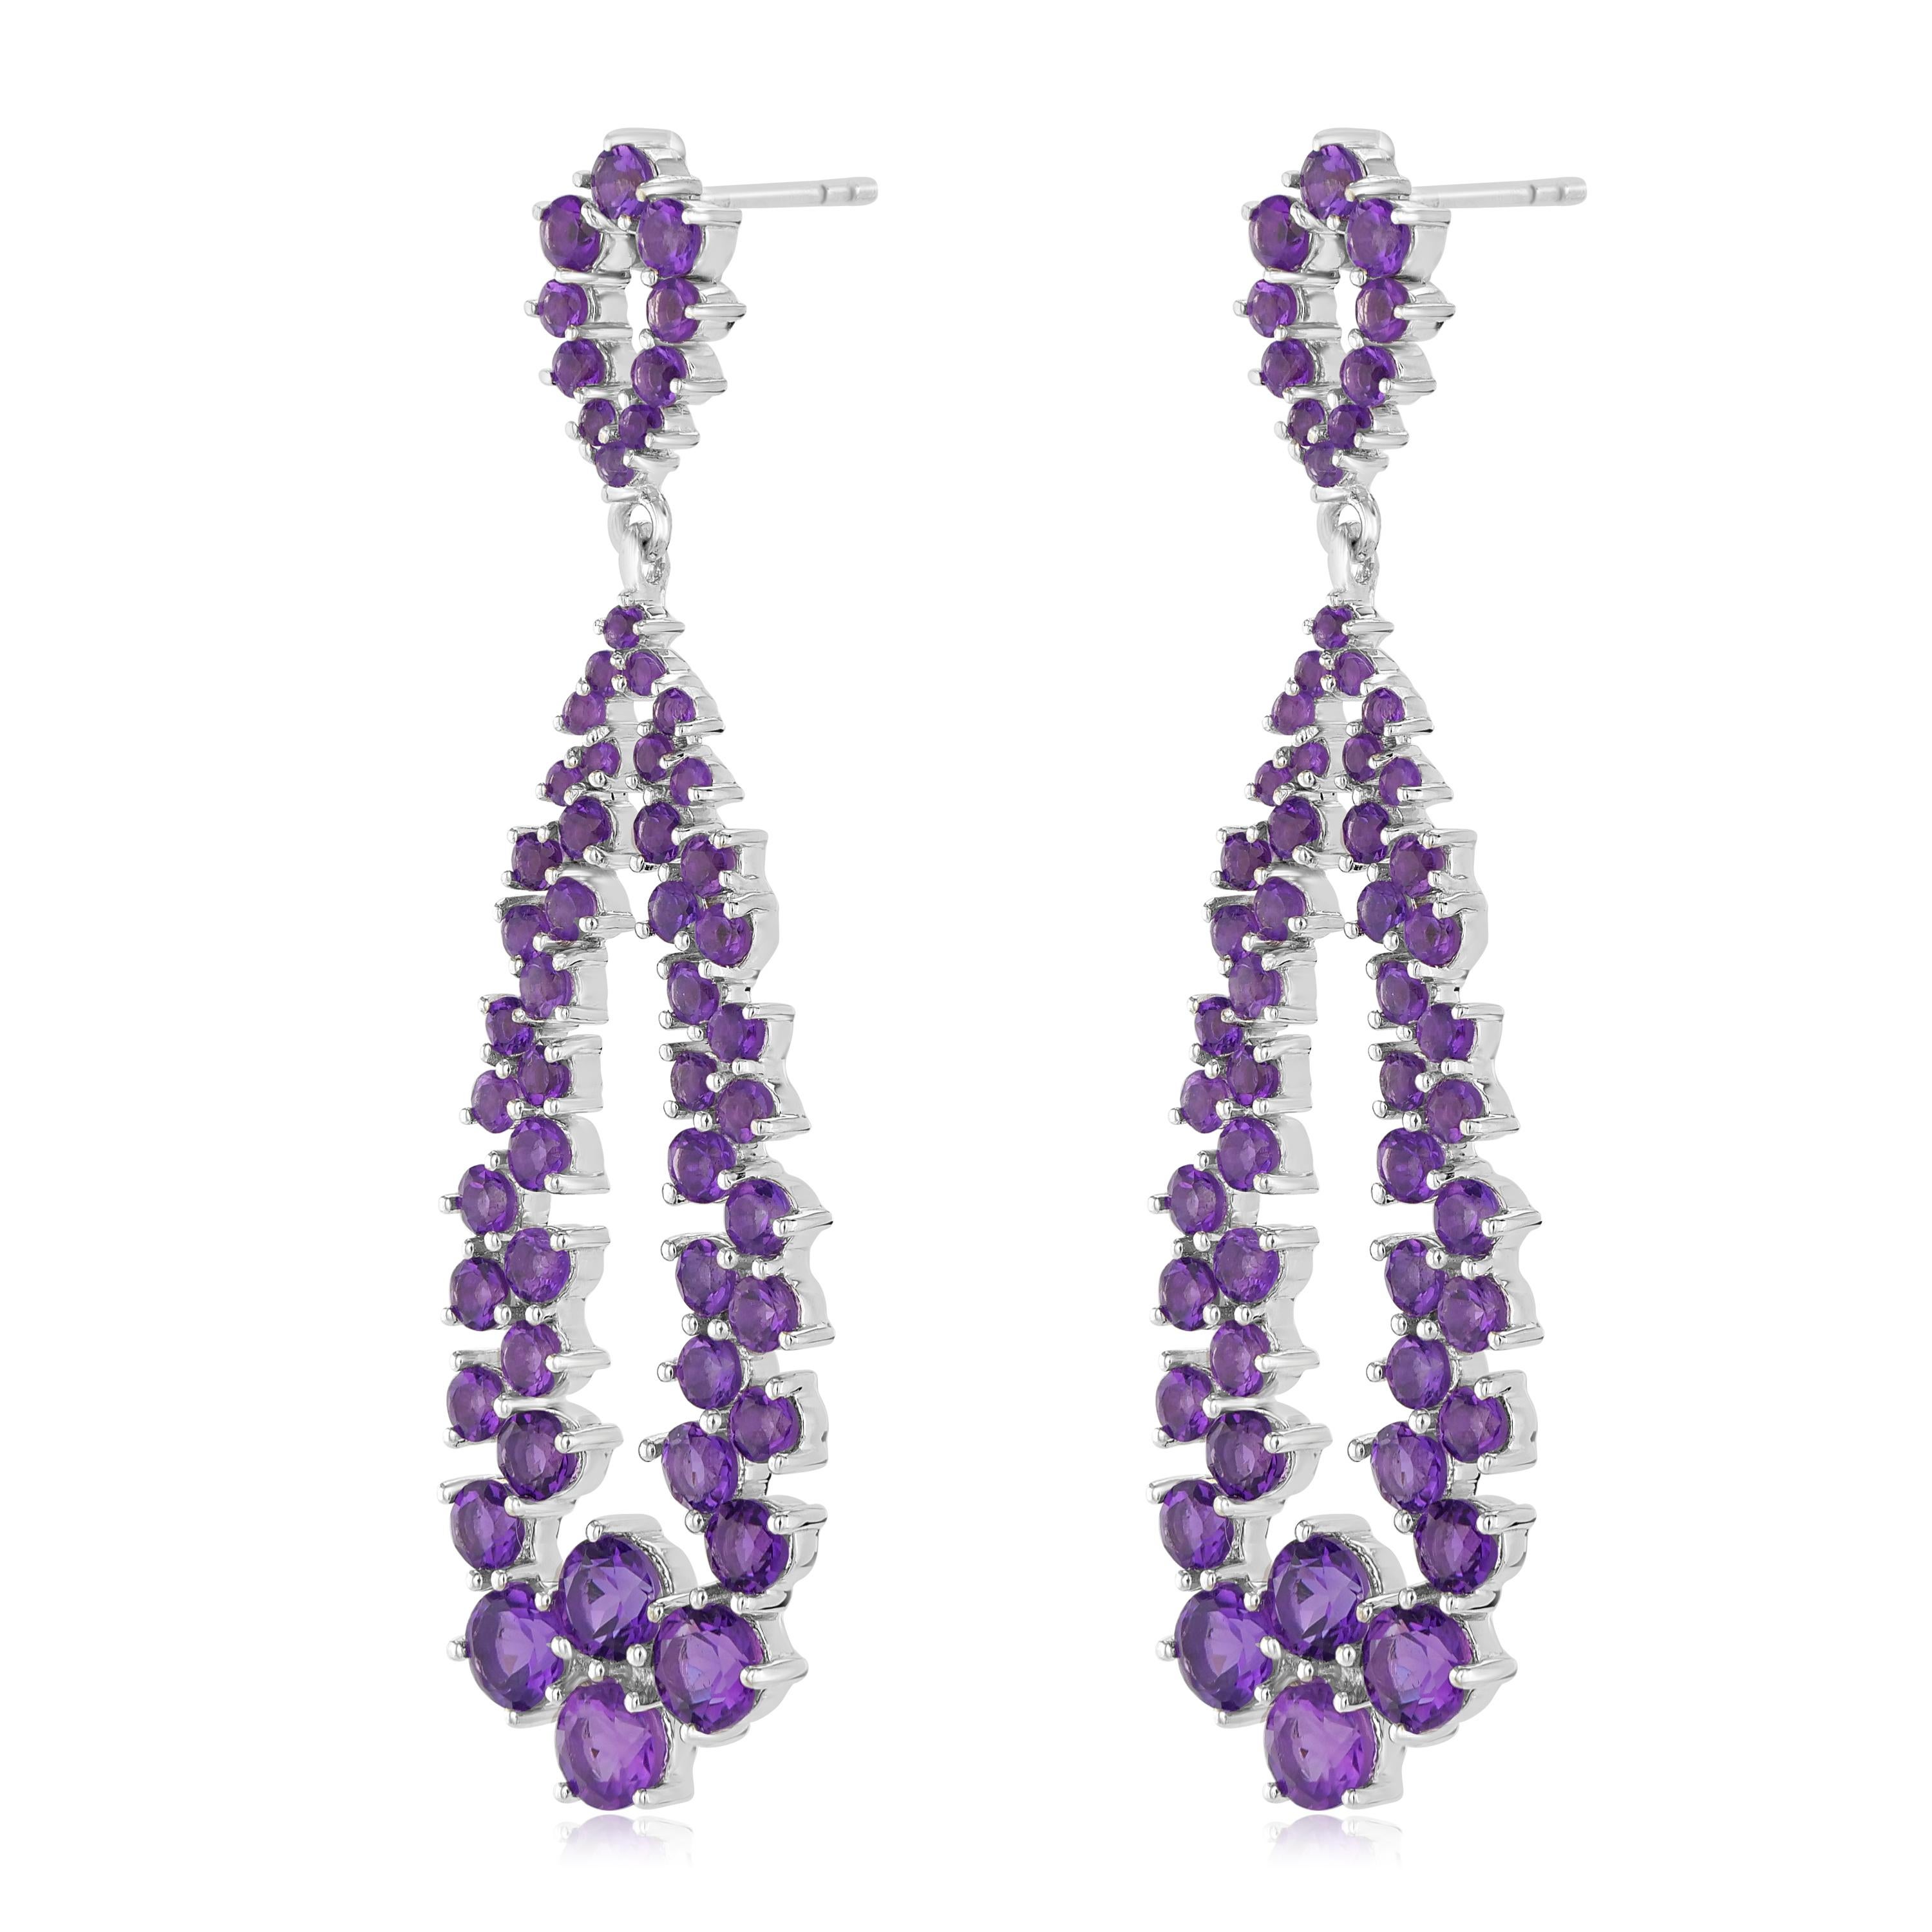 Known to be the birthstone for the month of February, amethyst helps the wearer for a balanced mindset . Featured with 110 amethysts in different sizes set in genuine and nickle free 925 sterling silver. These women's earrings come with post and